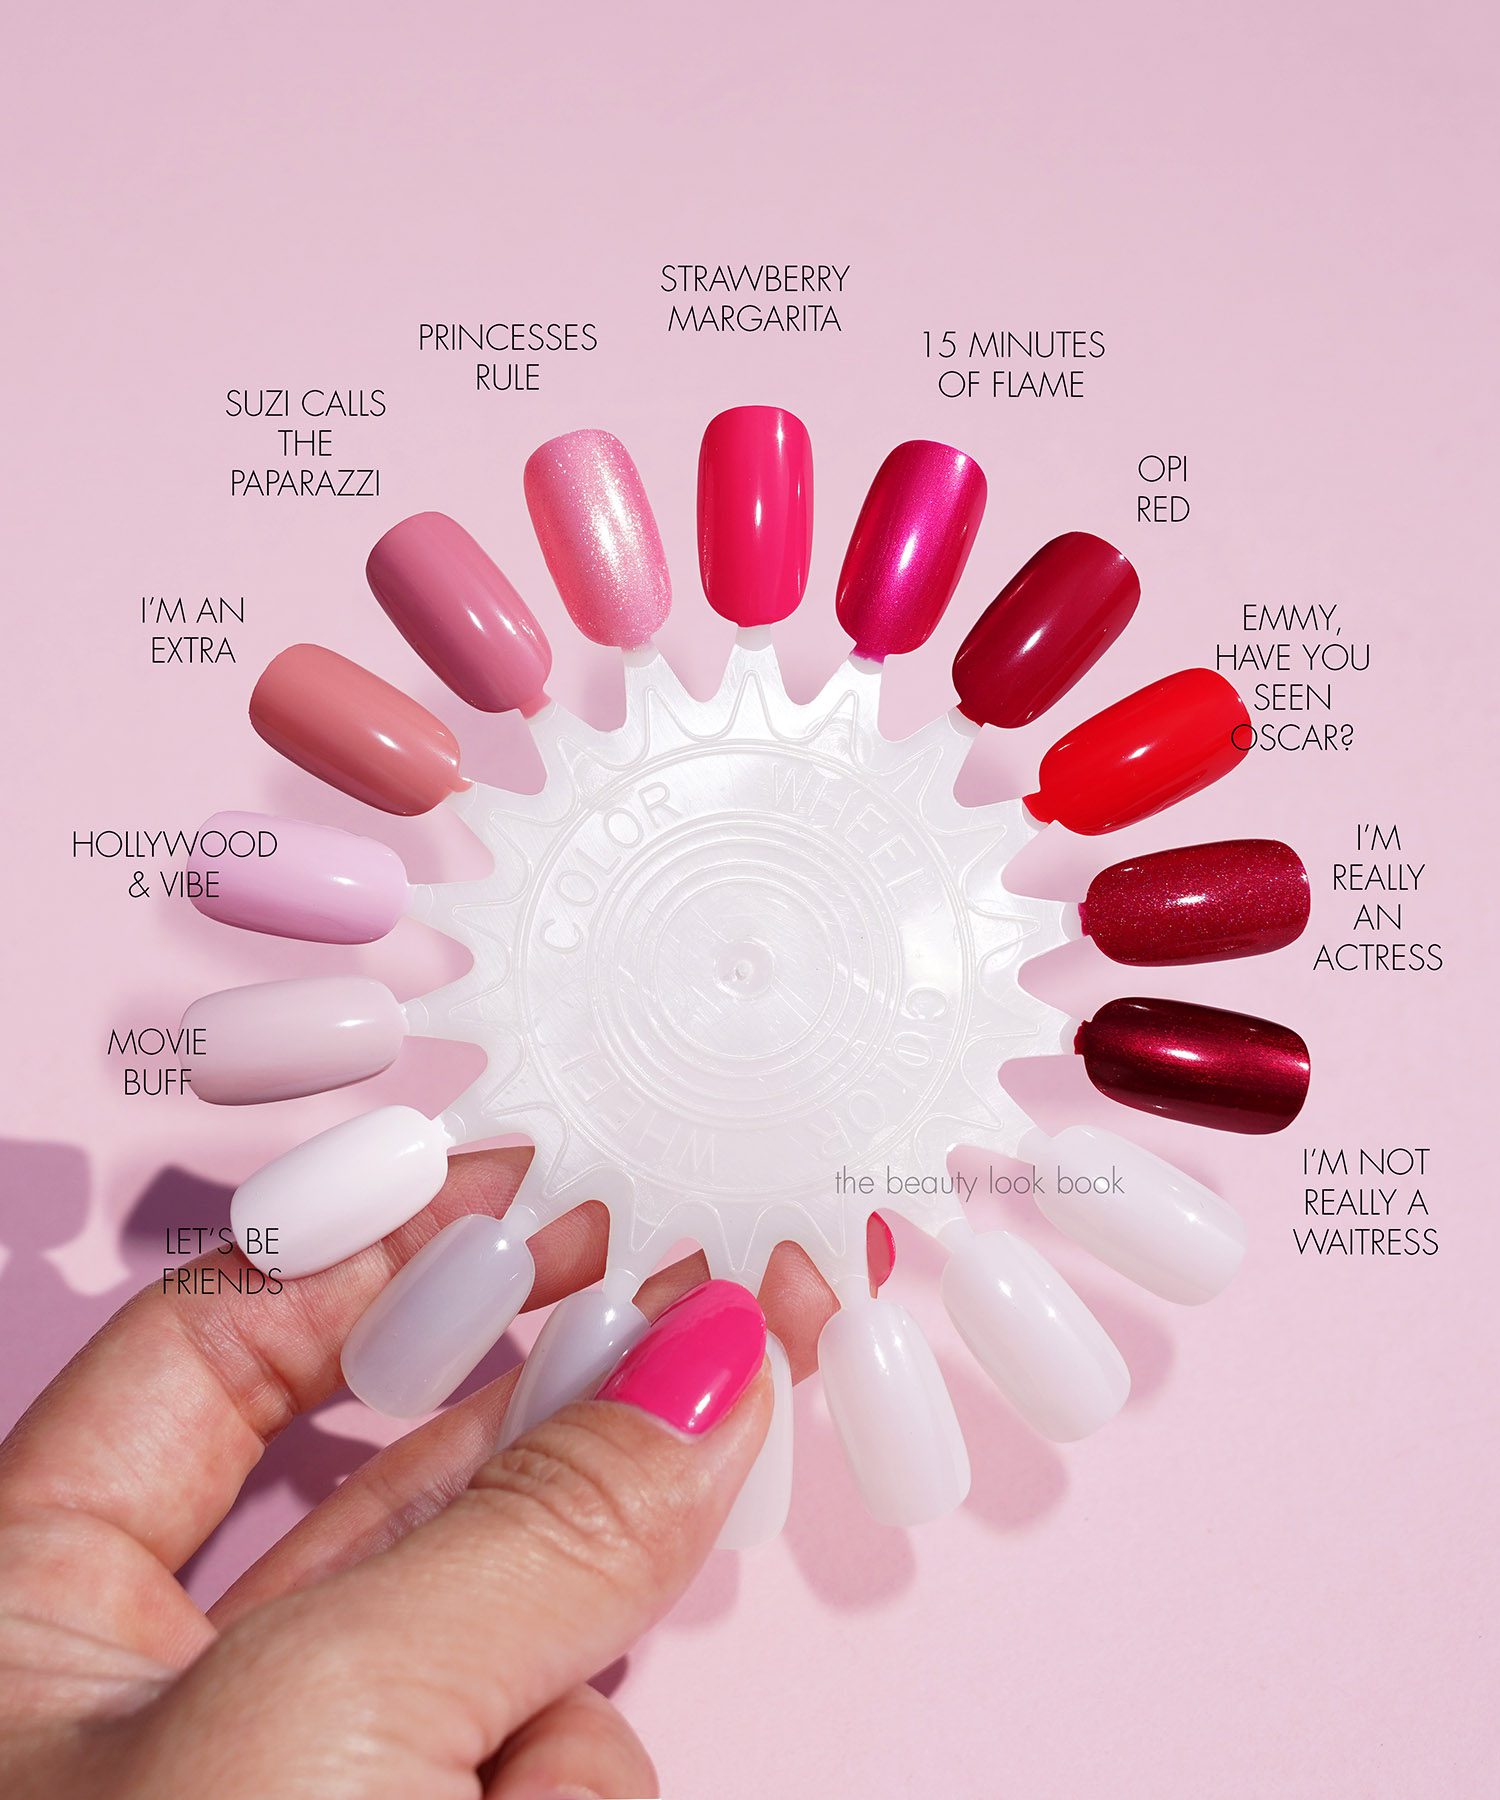 Ubevæbnet tempereret vært Pink + Red Nail Polishes To Try for Valentine's Day - The Beauty Look Book